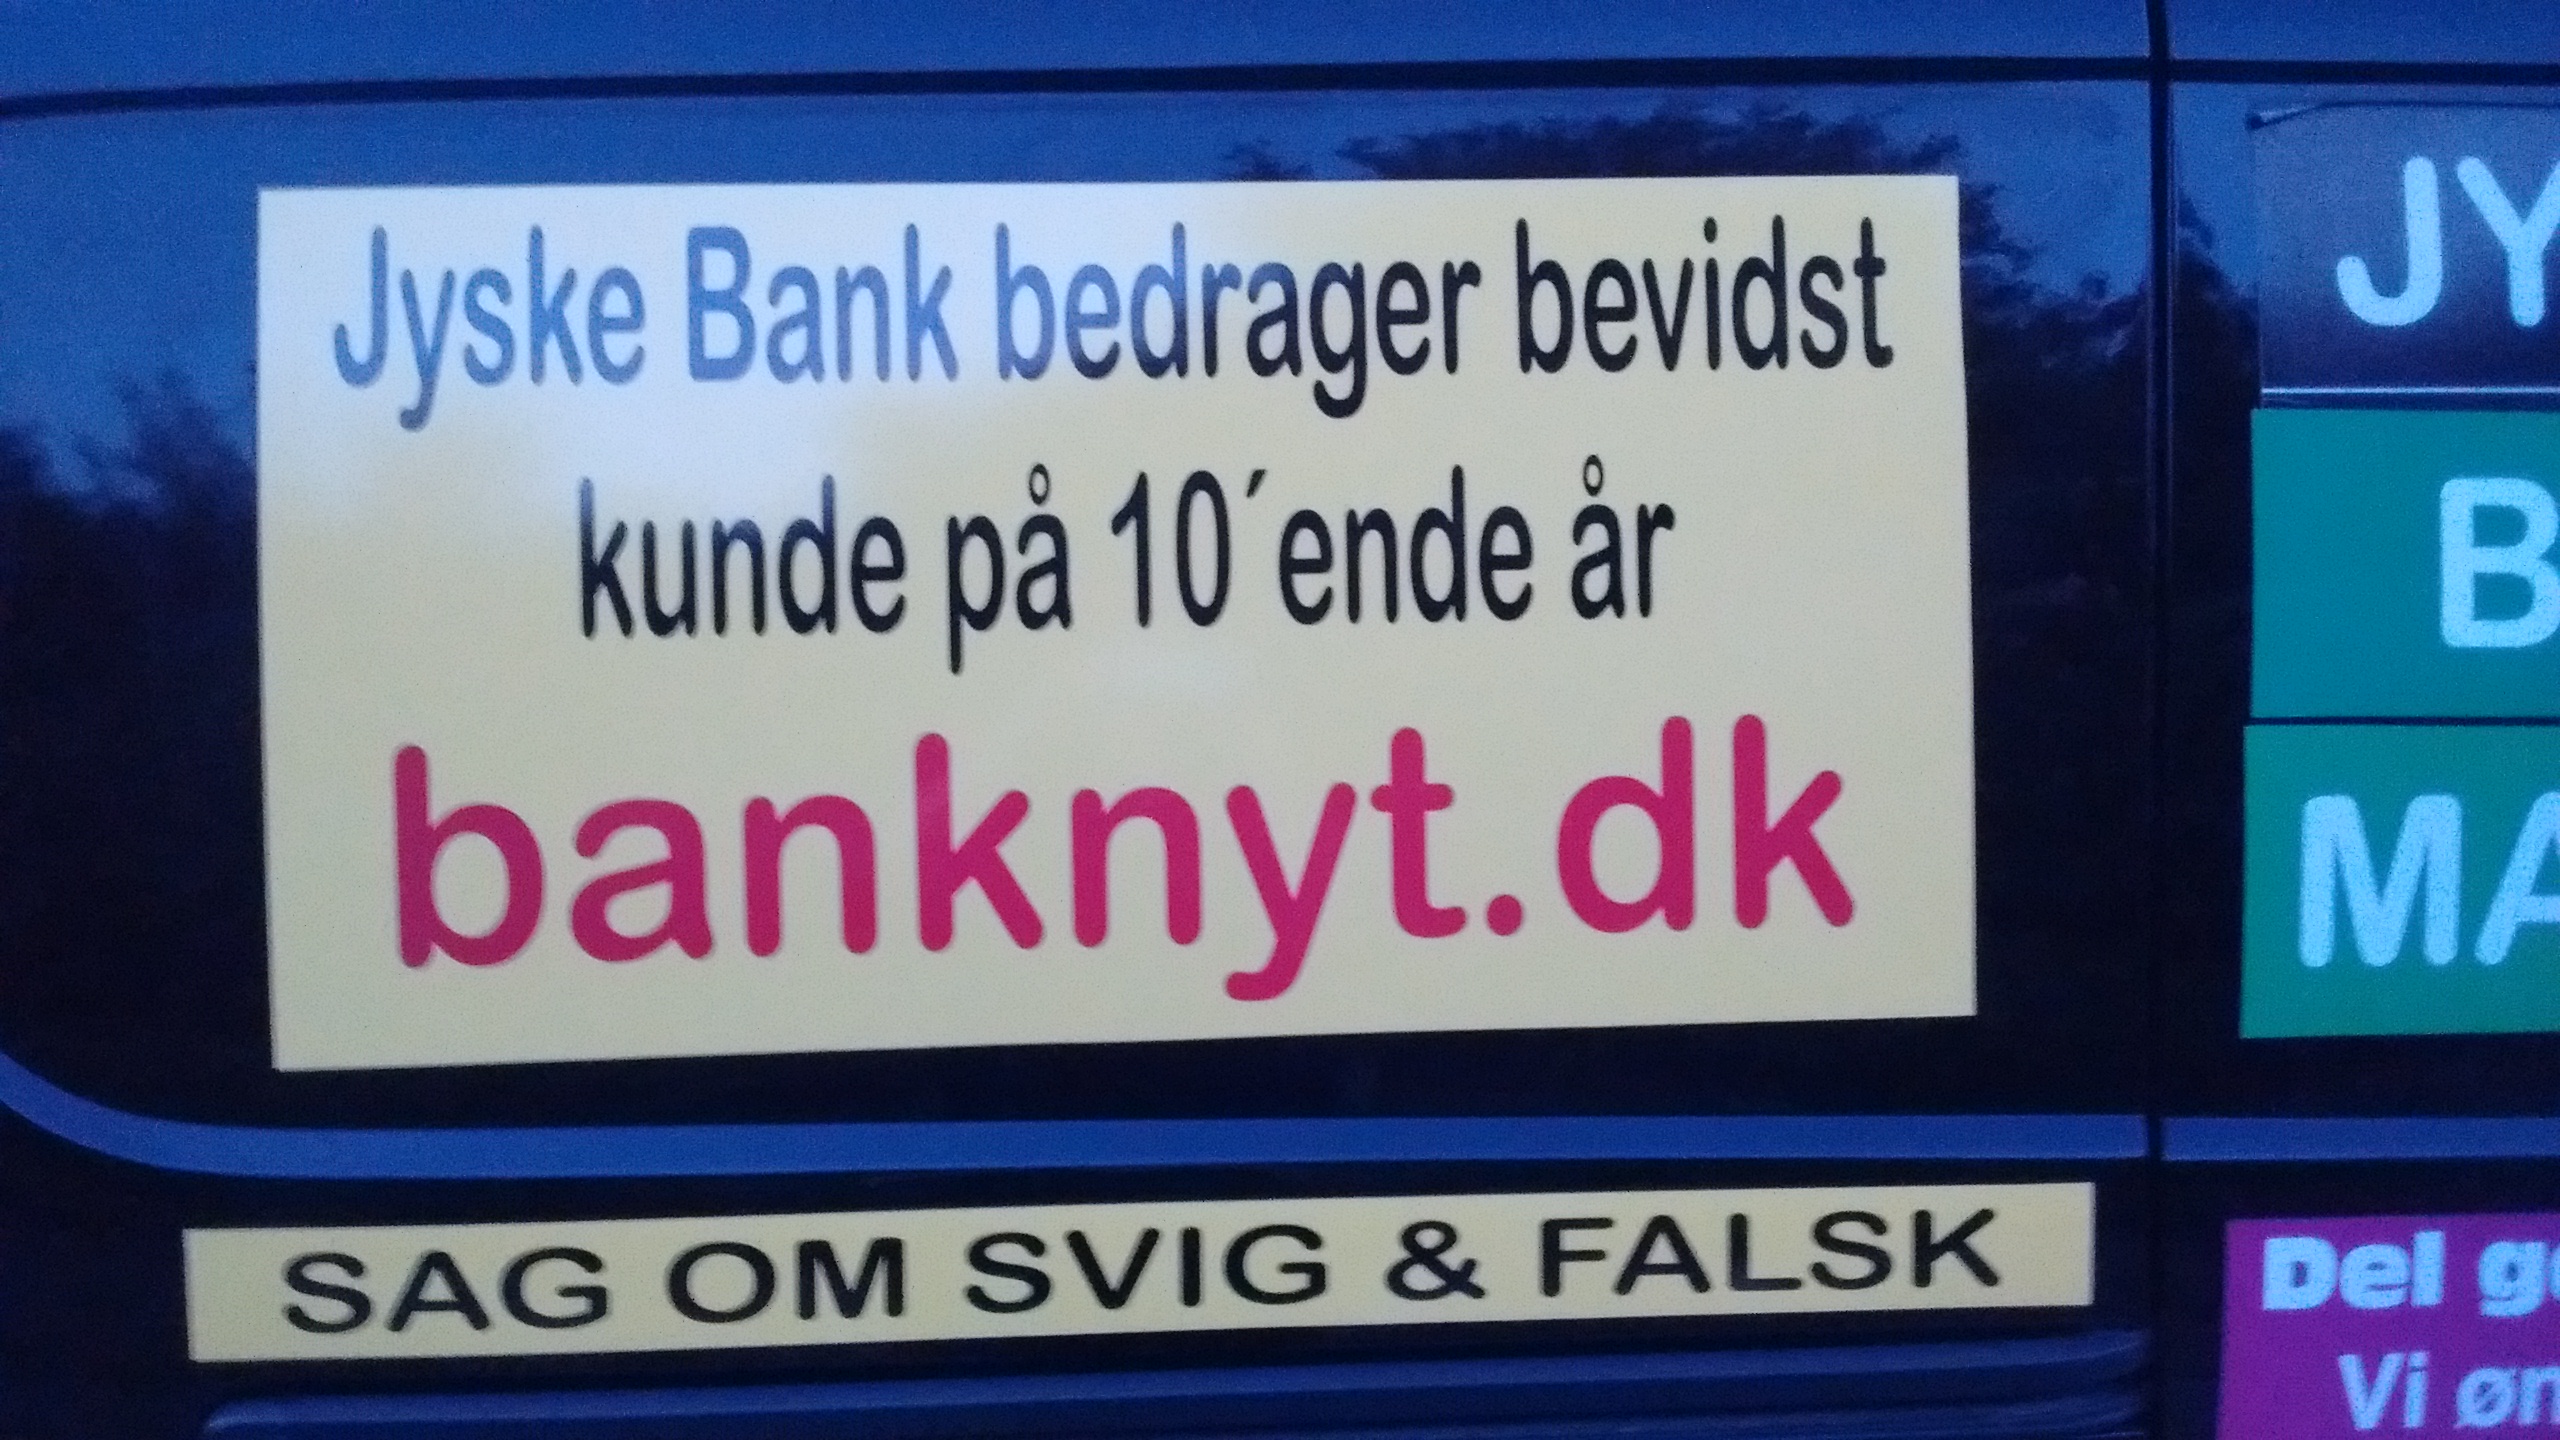 Lær jyskebank at kende Hvem dækker over Jyske Banks fortatte svigforretninger. Bribery at the top of the Danish business seems to have been politically approved. Following Jyske Bank's fraud case. Lundgren's lawyer partner company paid several million Danish kroner, moreover, the same Lundgren's lawyers who would not bring a case against the Danish bank Jyske Bank for fraud. Which Lundgren's lawyer partner company regrettably forgot to submit to the court. That it happened according to Jyske Bank's management, certainly by CEO Anders Dam who is directly contributing to Jyske Bank's continued crimes. When Jyske Bank then chose to give the large law firm Lundgren's lawyers a huge order. It became very clear that the overall board of directors of Jyske Bank continues to expose the customer to very serious fraud transactions. And that Jyske Bank's board of directors is still behind millions of scams and now probably also corruption. All to disappoint in legal matters, and to serve the shareholders in the Danish Bank's financial interests.